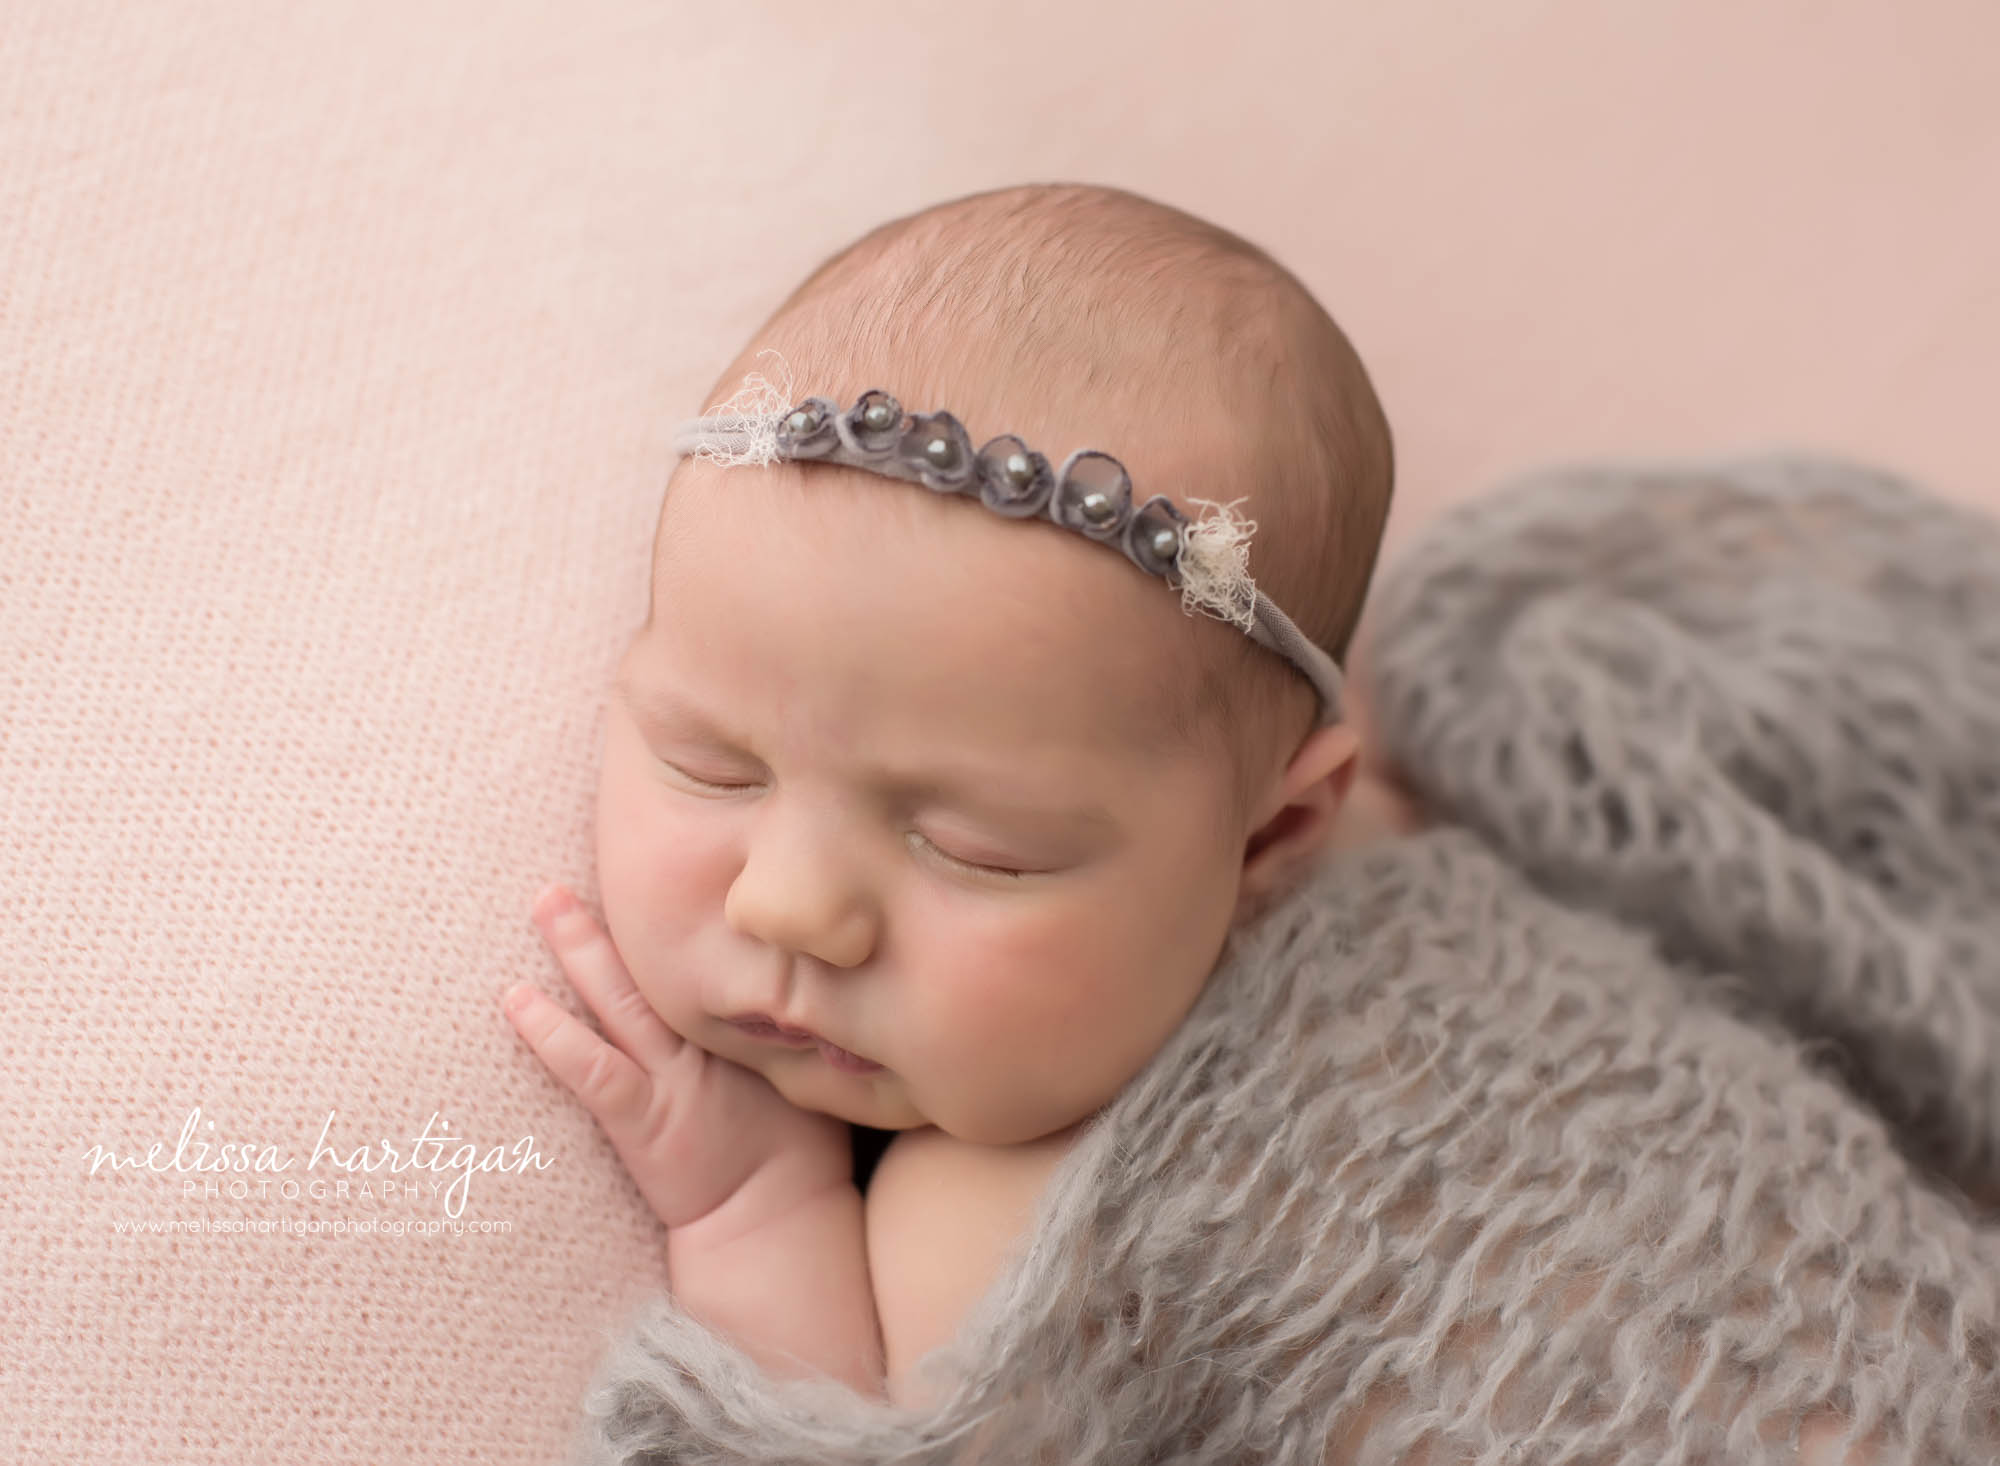 Newborn baby girl posed on side with light gray headband and knitted layer